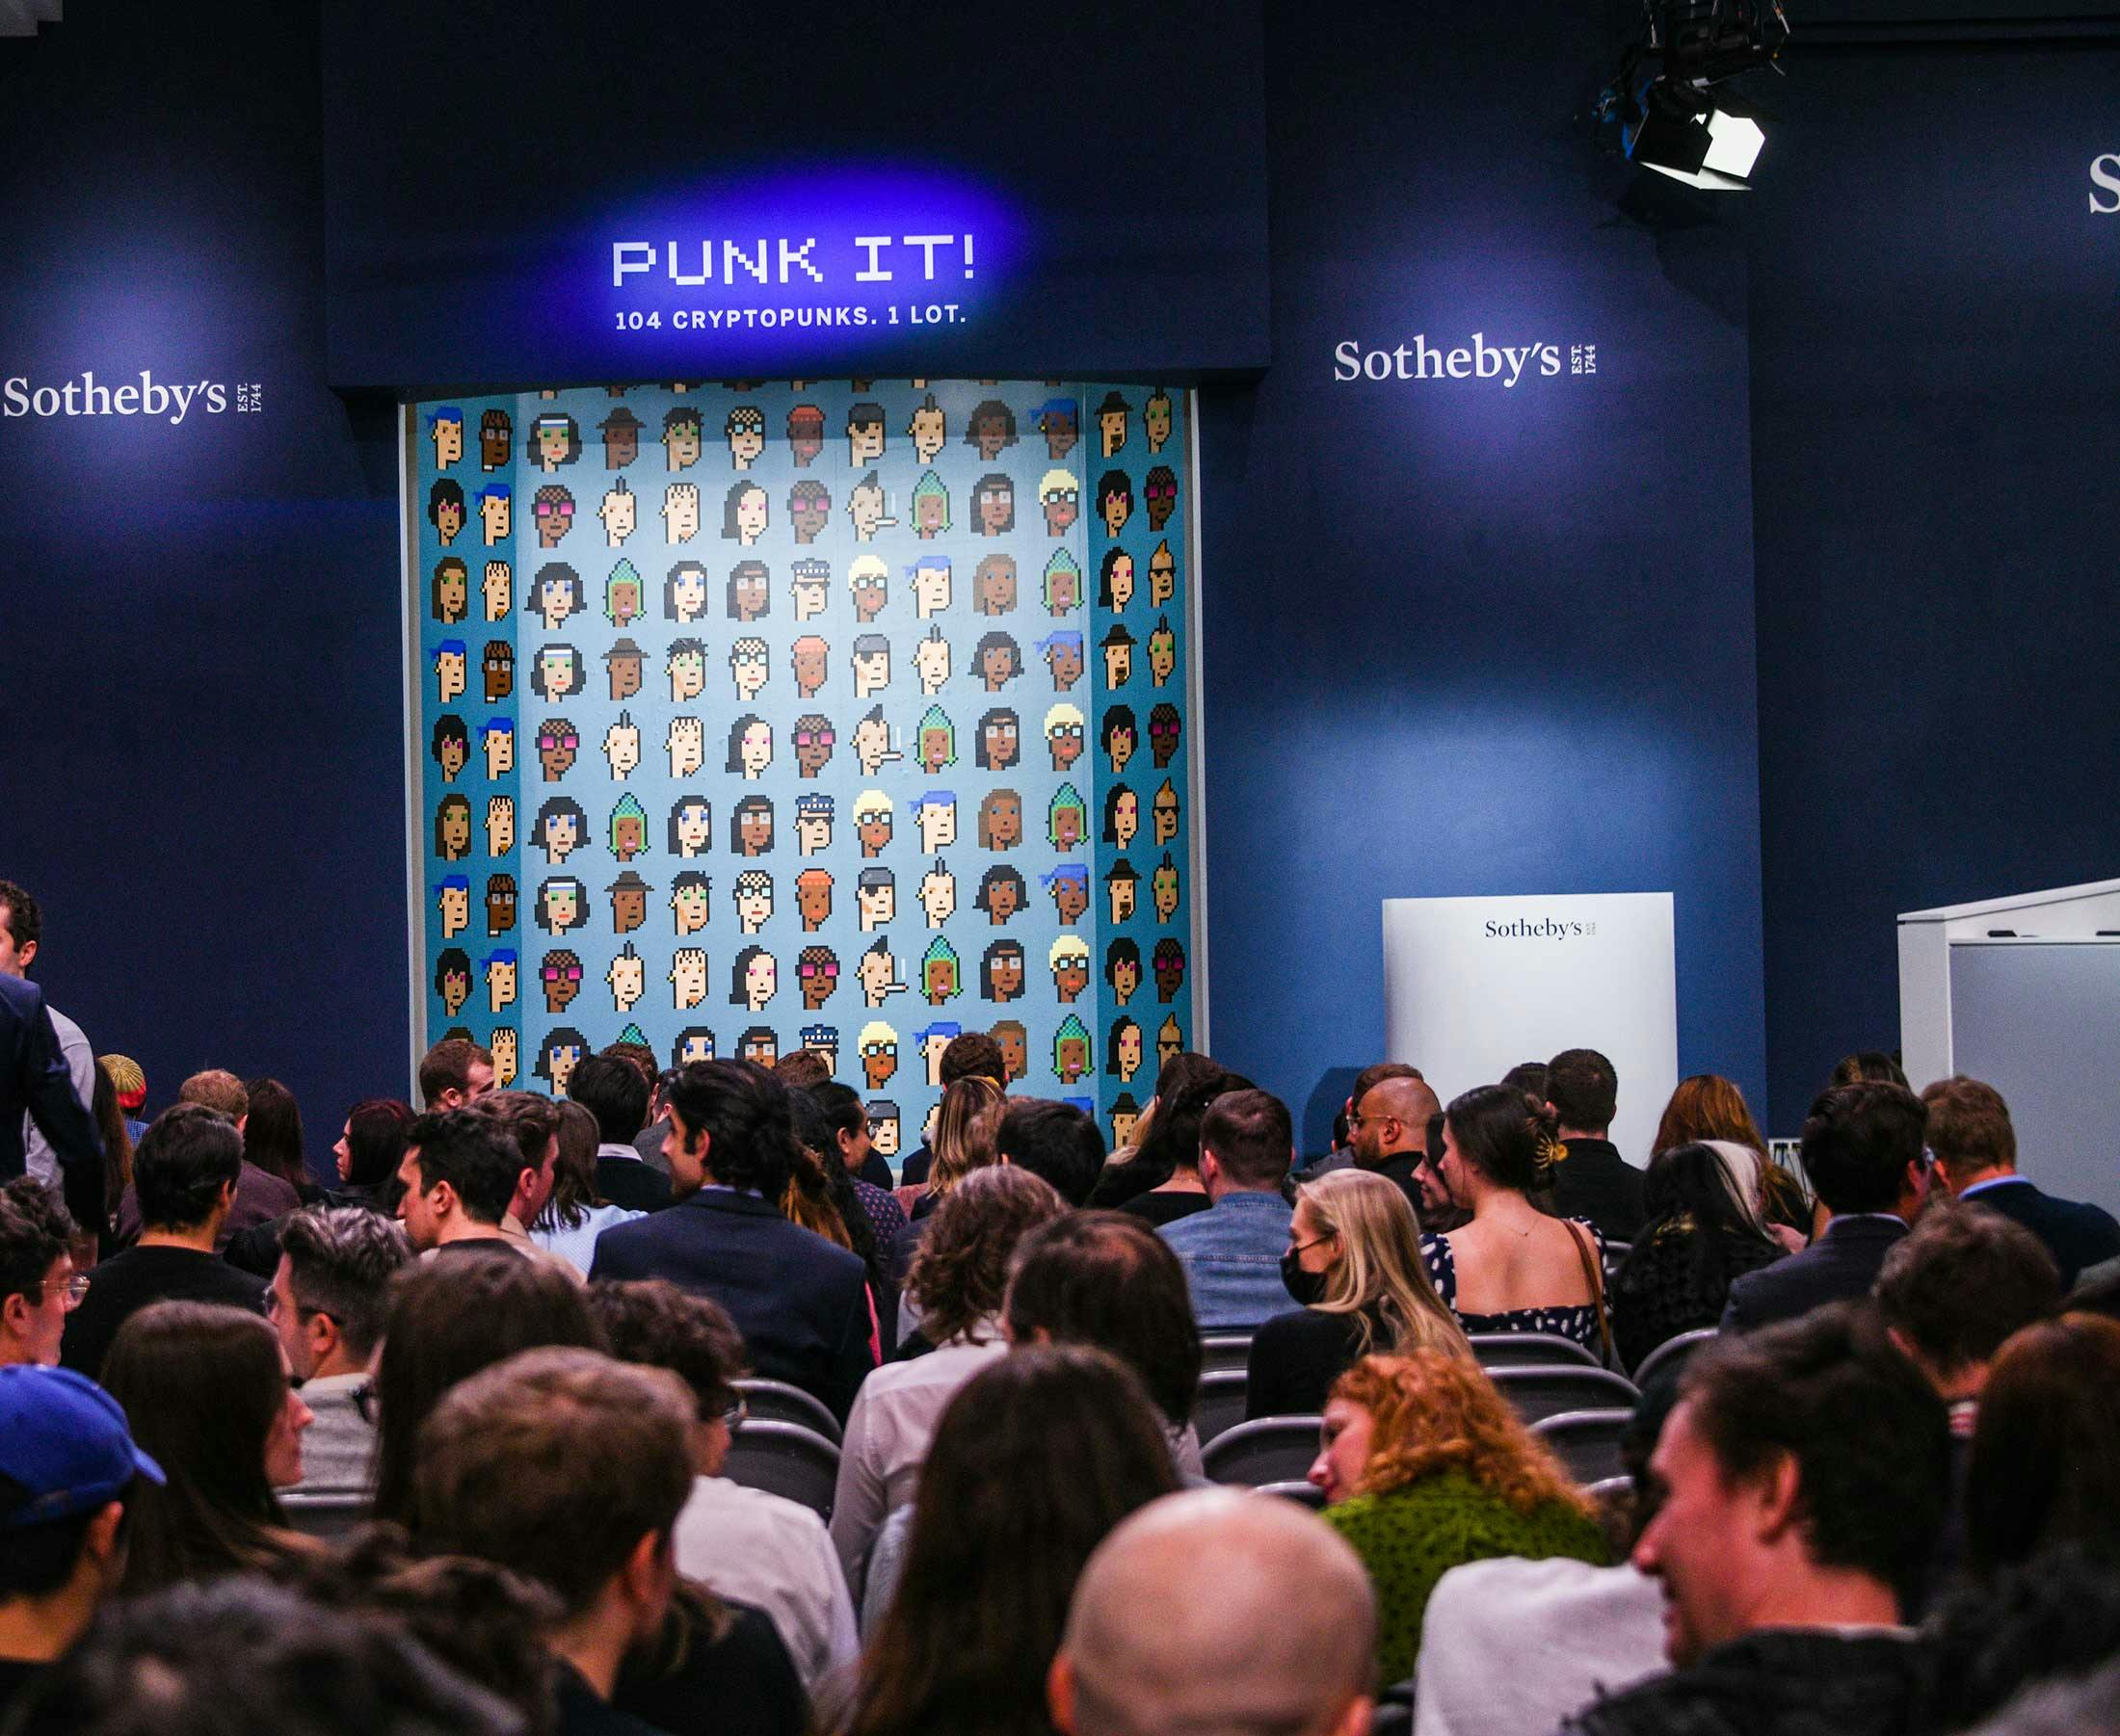 104 Punks that didn’t sell at Sotheby’s. Image from https://www.bloomberg.com/news/articles/2022-03-03/big-cryptopunk-auction-at-sotheby-s-ends-in-mystery?leadSource=uverify%20wall.